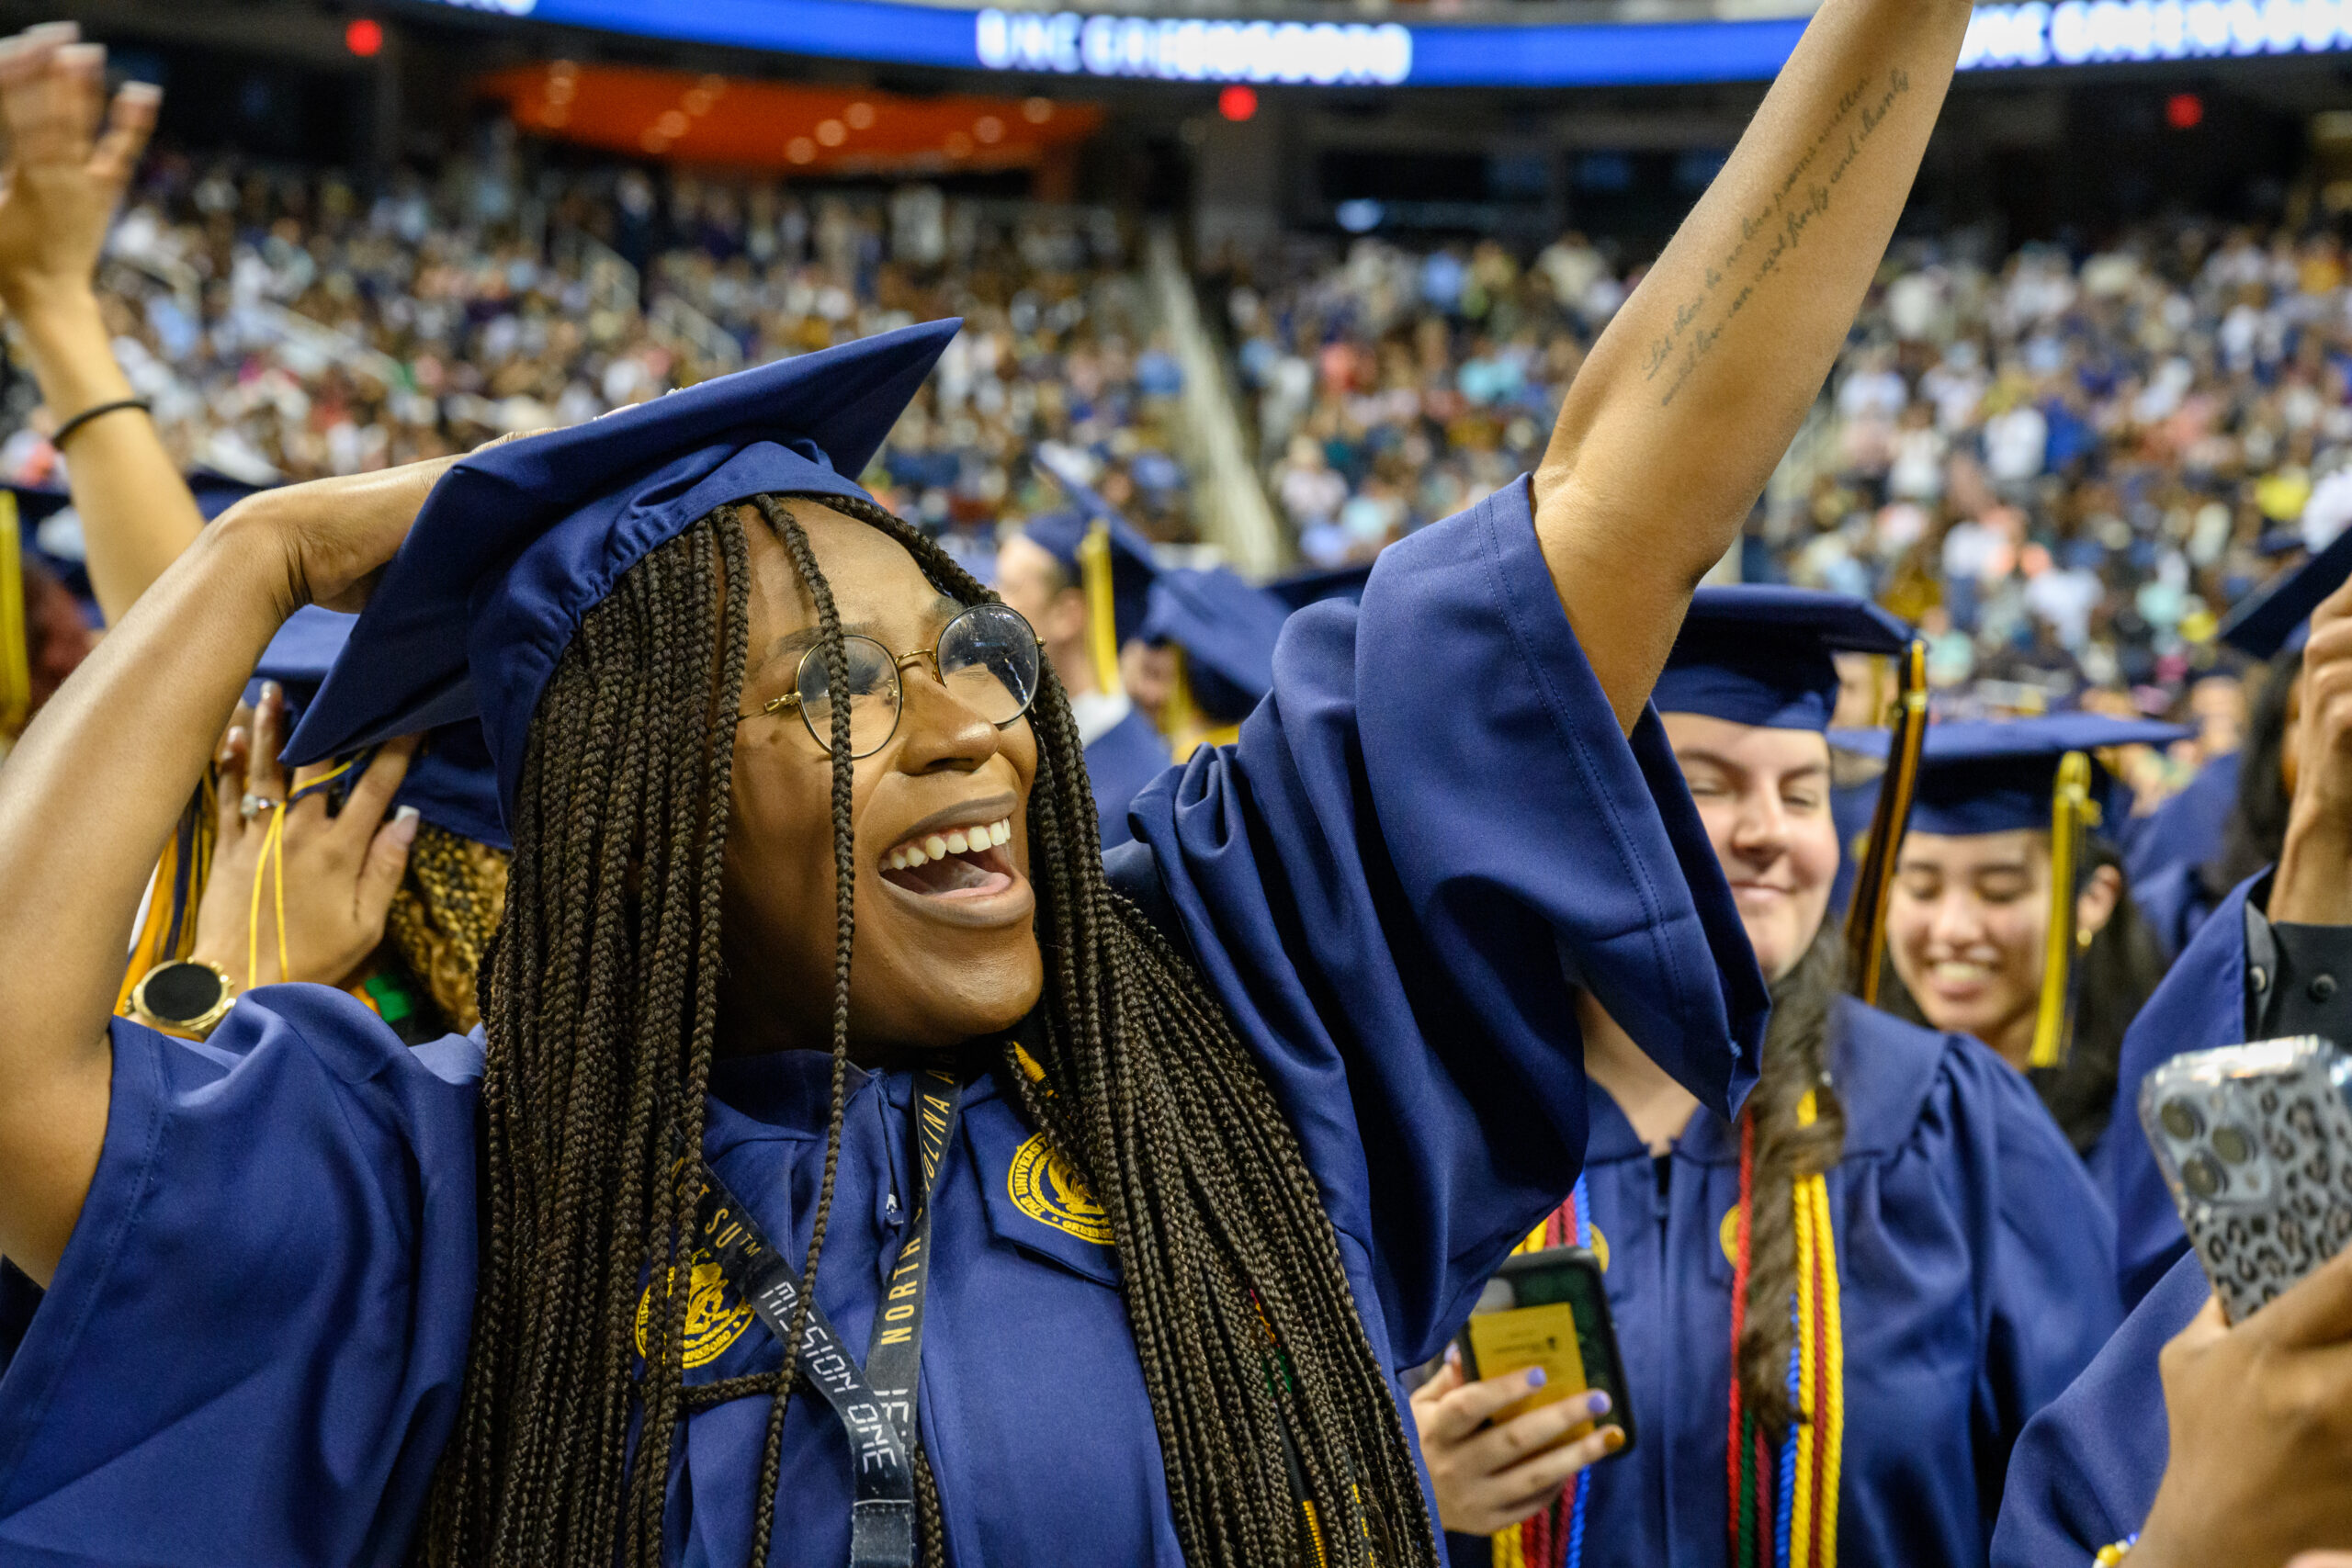 Student in graduation robe at UNCG Spring Commencement 2022